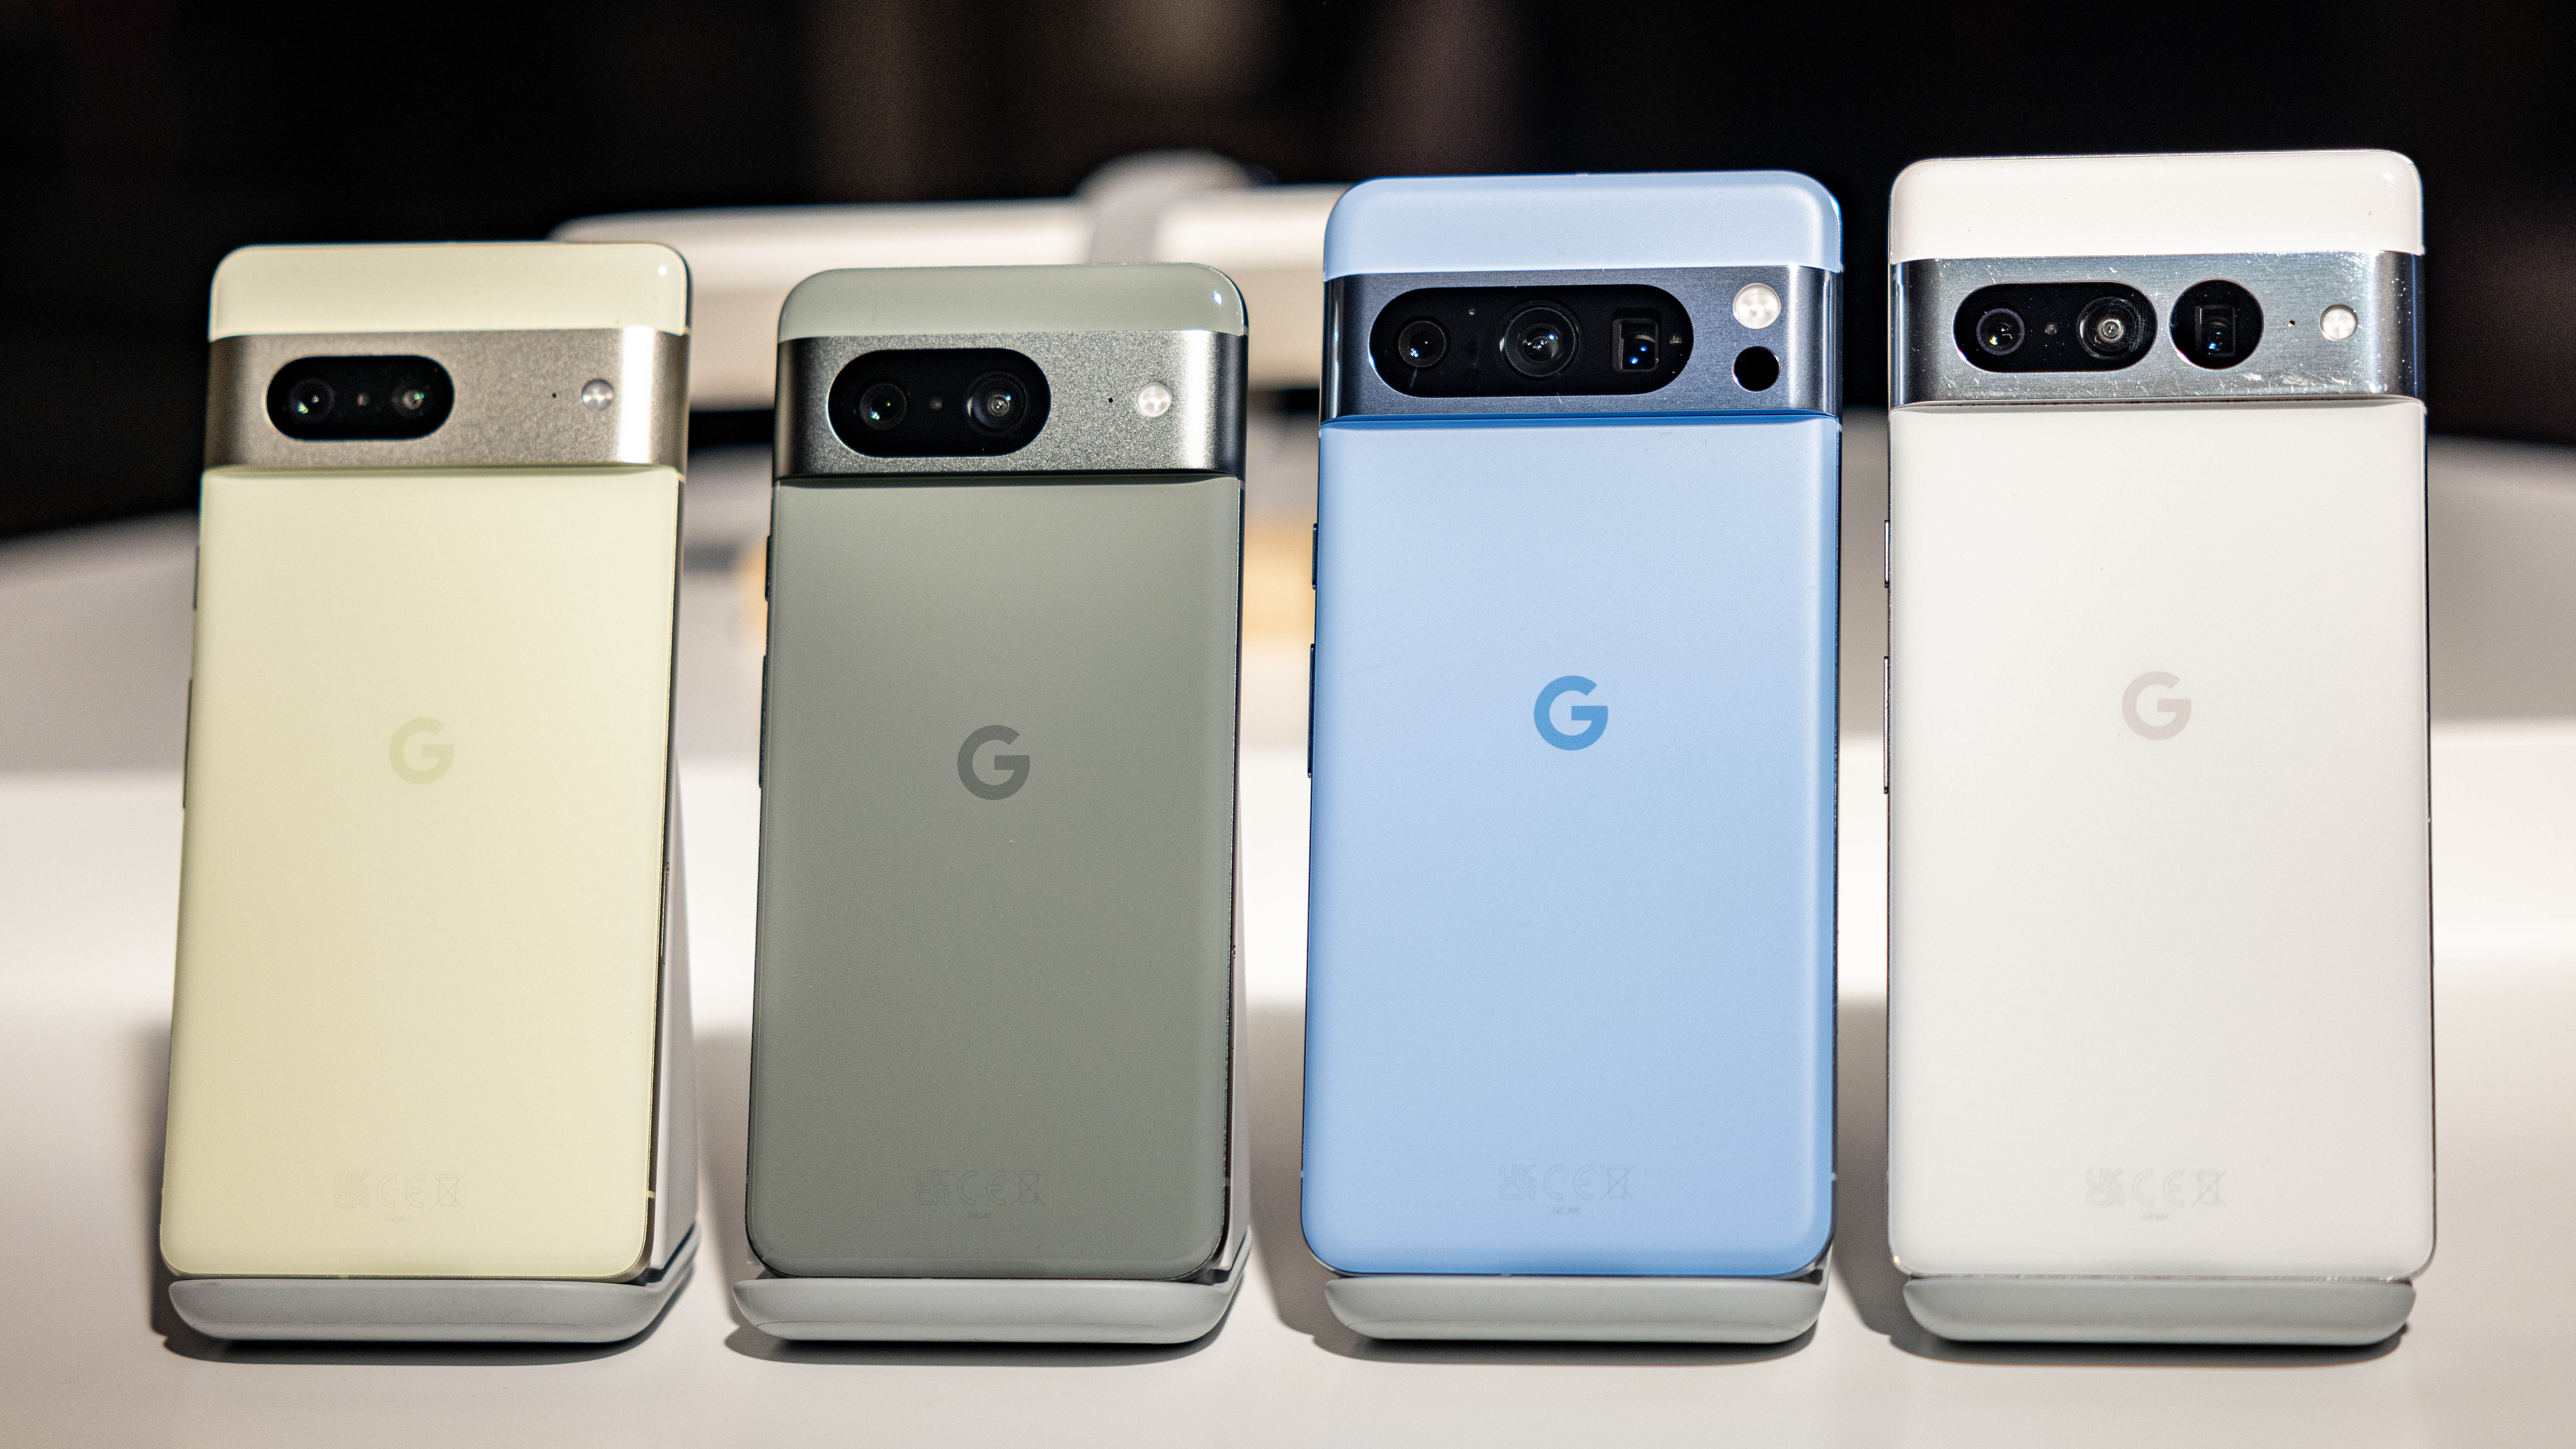 Google Pixel 7 review: a capable and cost-effective camera phone